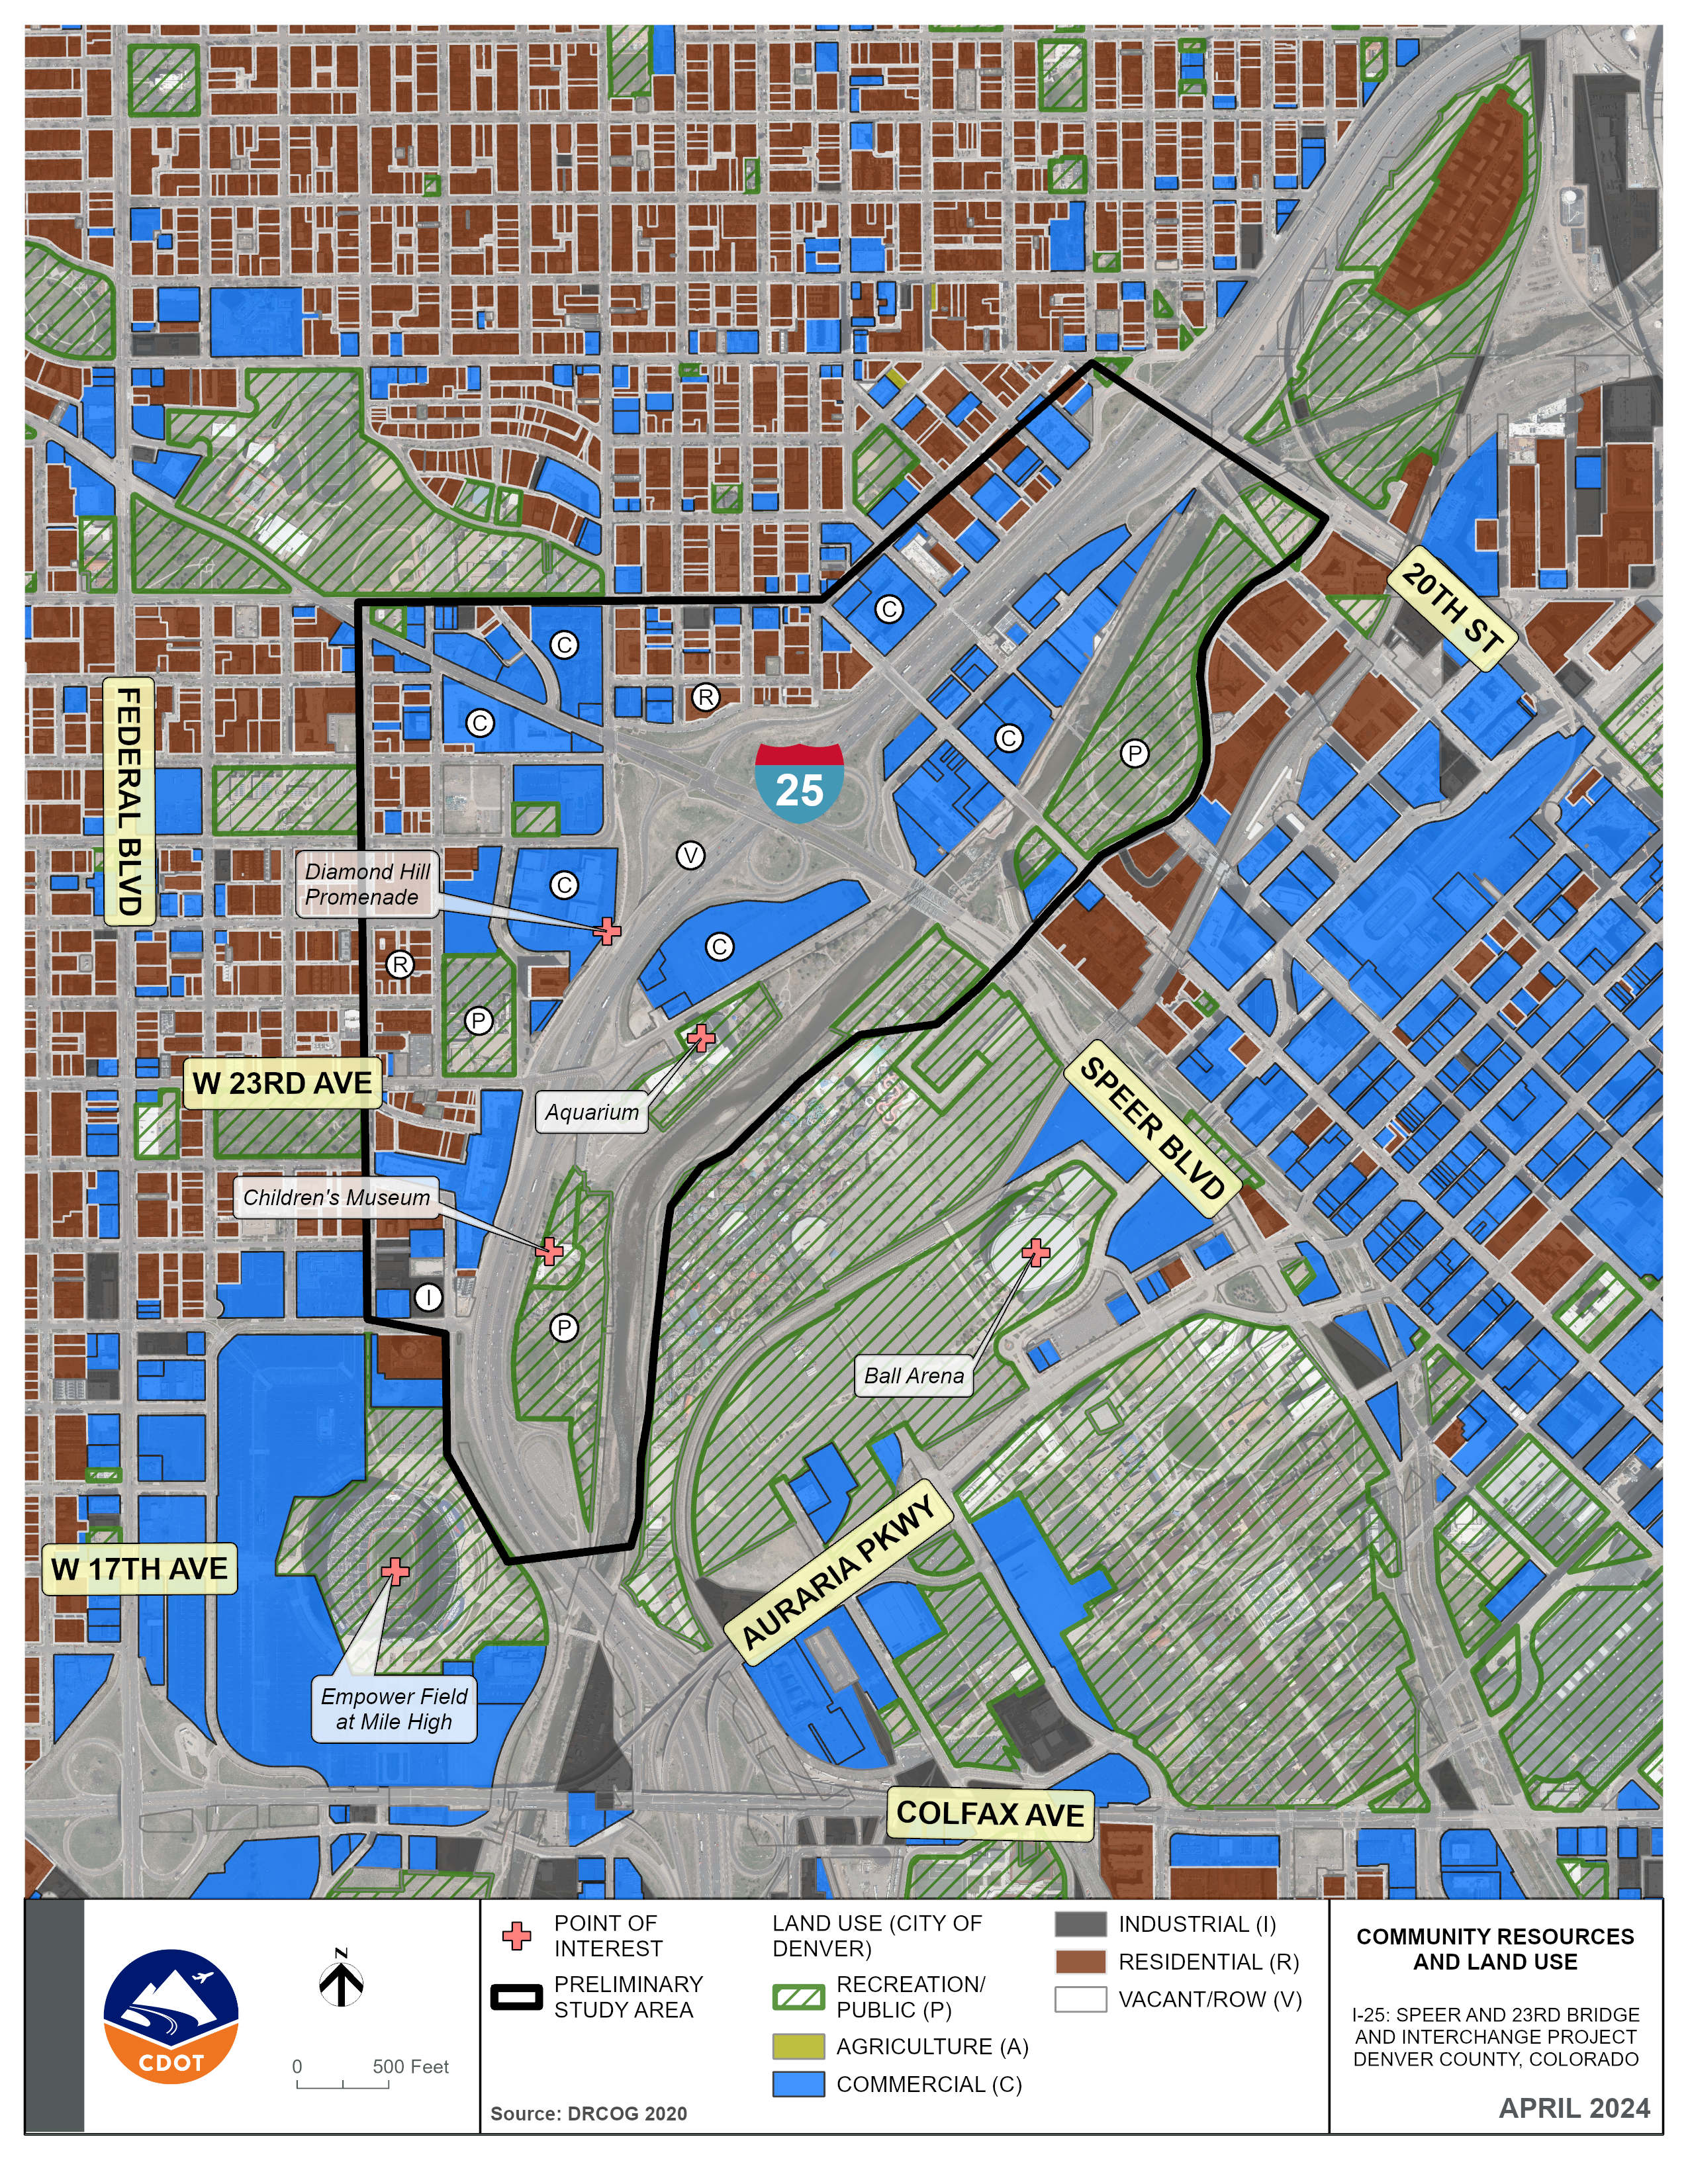 Community Resources and Land Use Map.jpg detail image